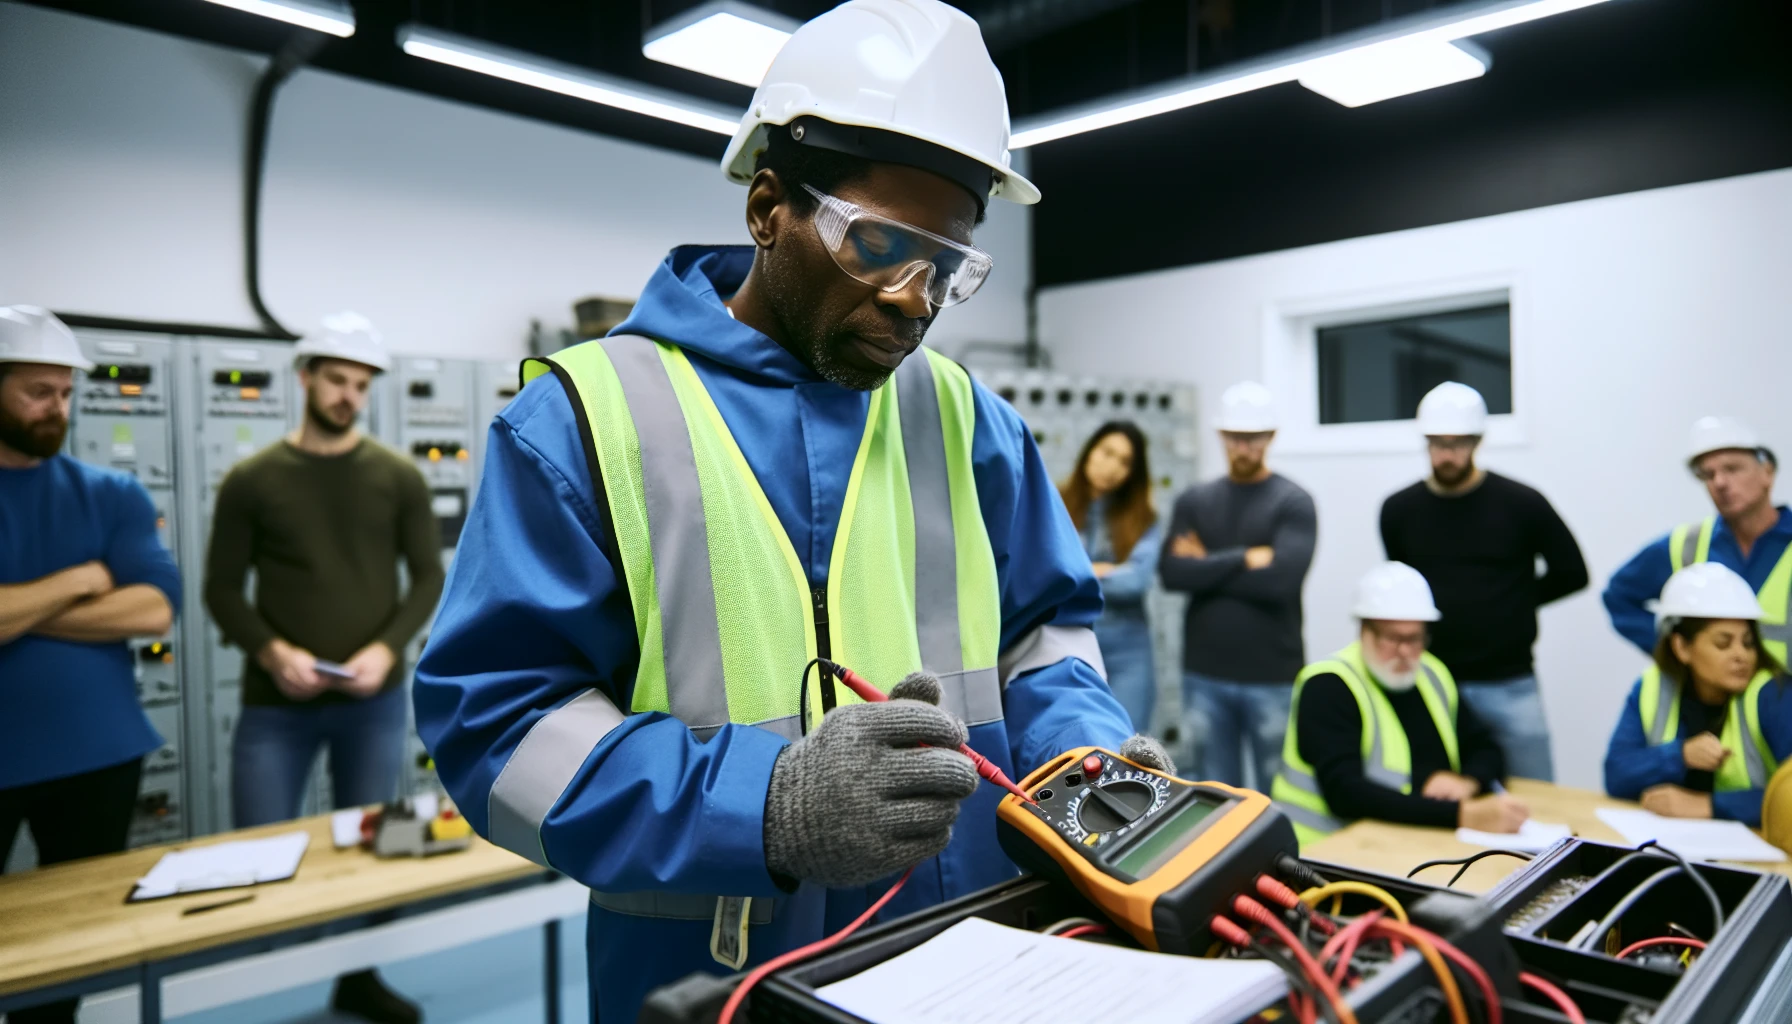 Industrial electrician attending professional development session